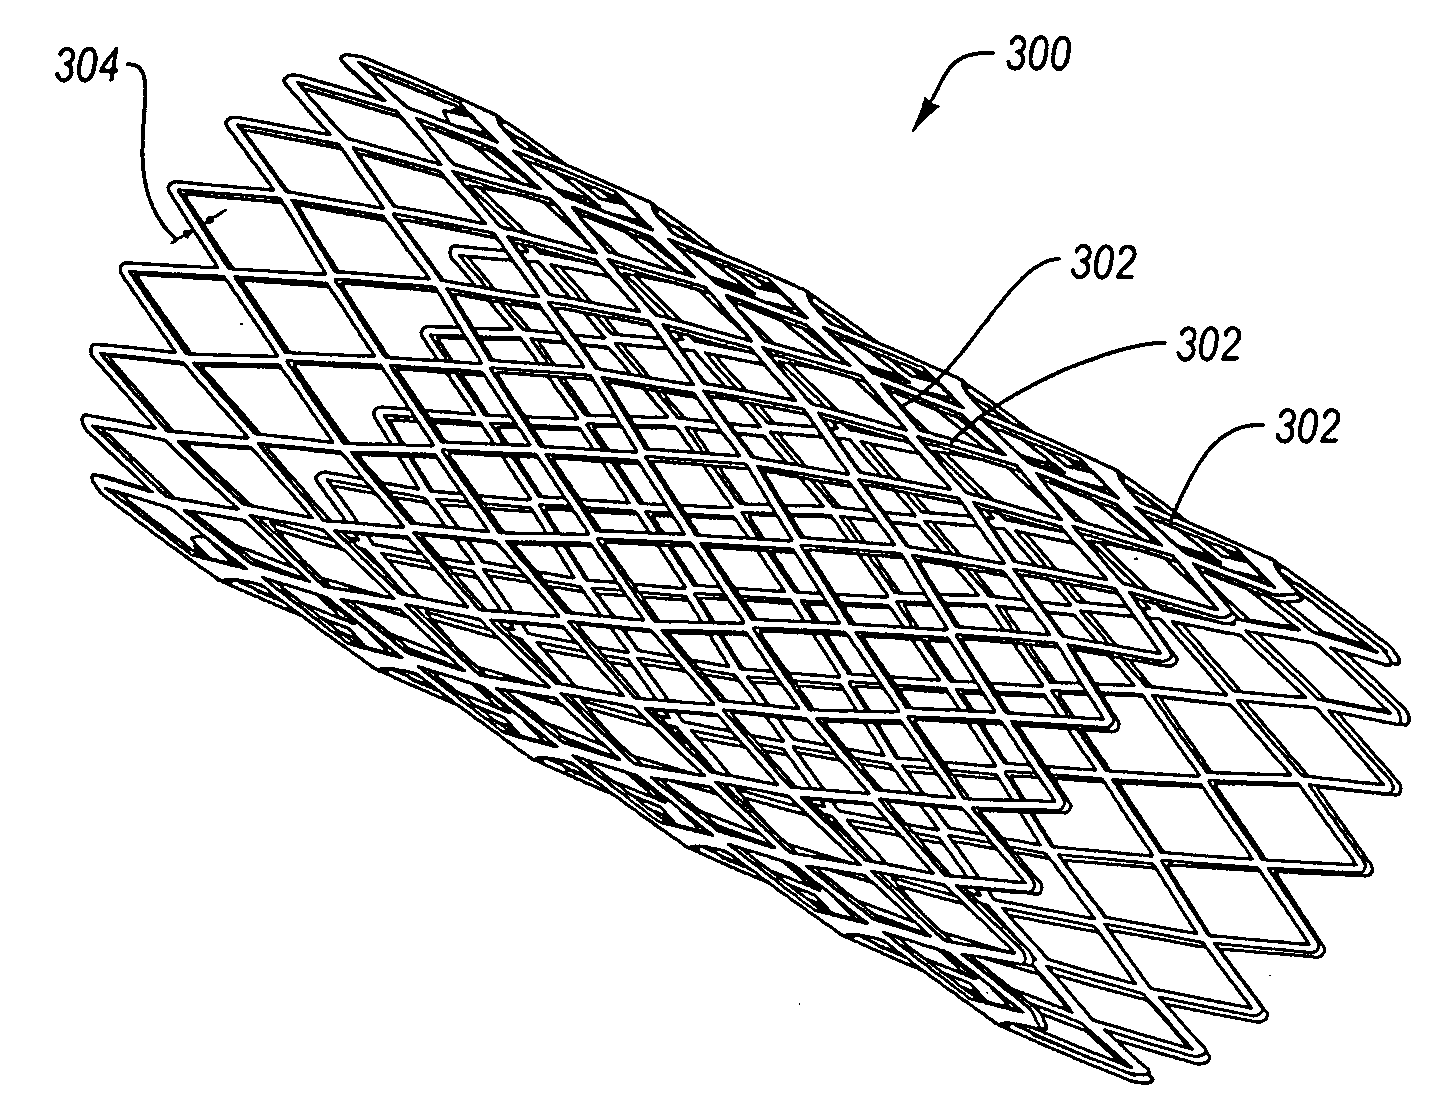 Fatigue-resistant nickel-titanium alloys and medical devices using same